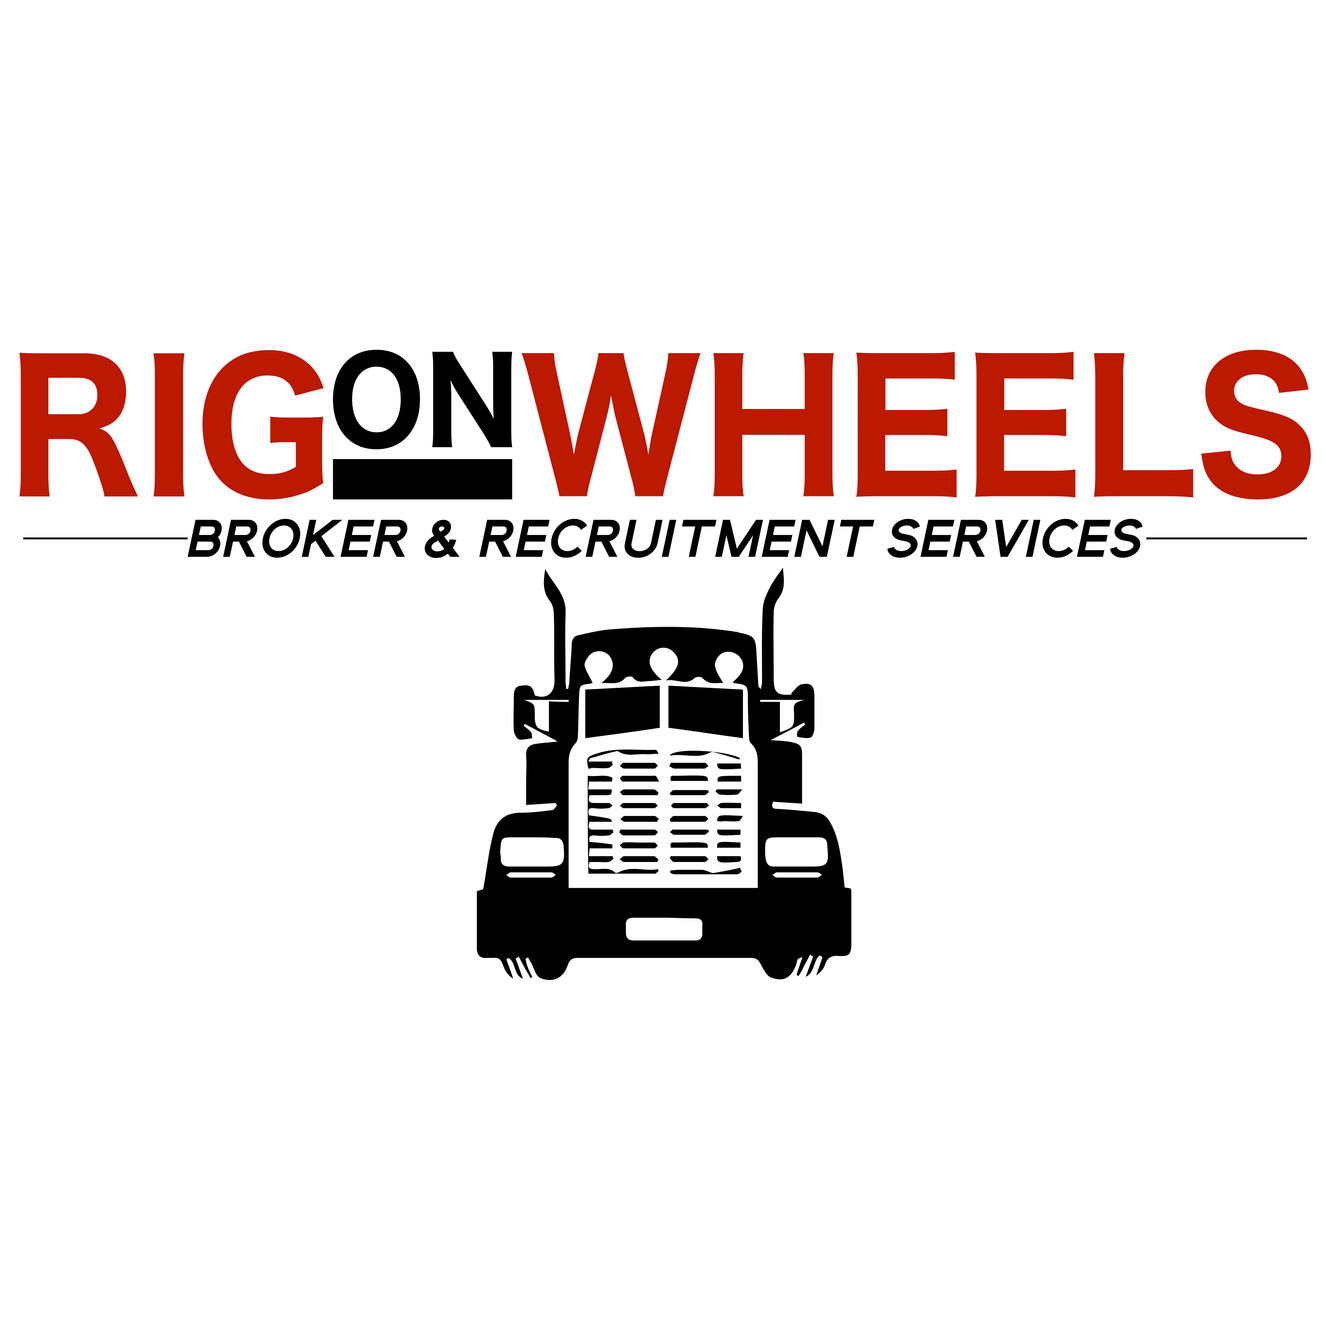 Truck Driver Recruiting Agency | Recruitment Services Companies | Rig On Wheels